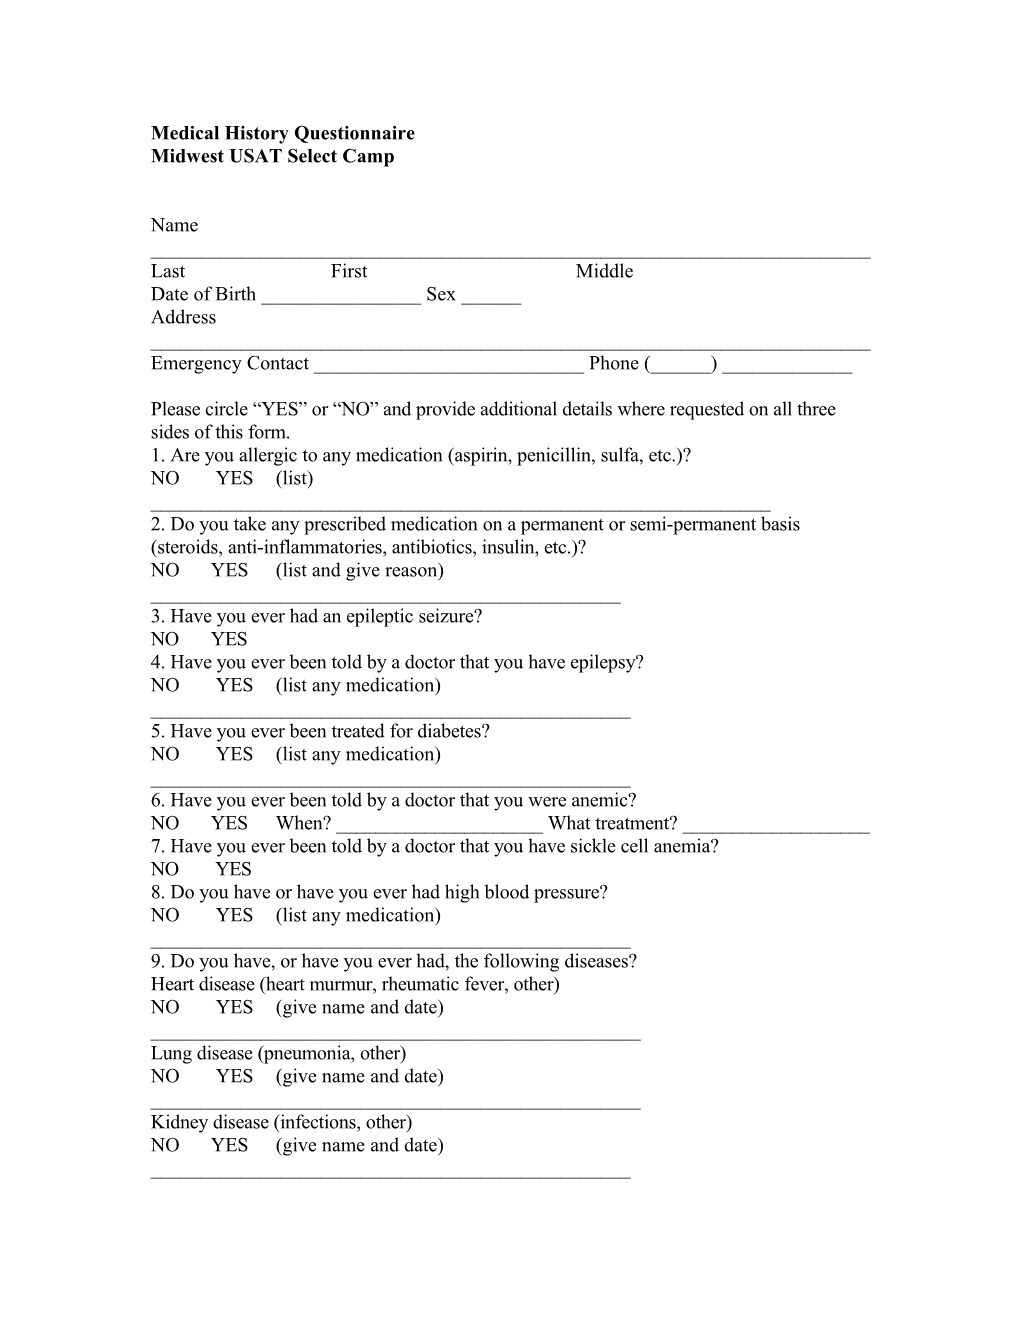 Sample Medical History Questionnaire